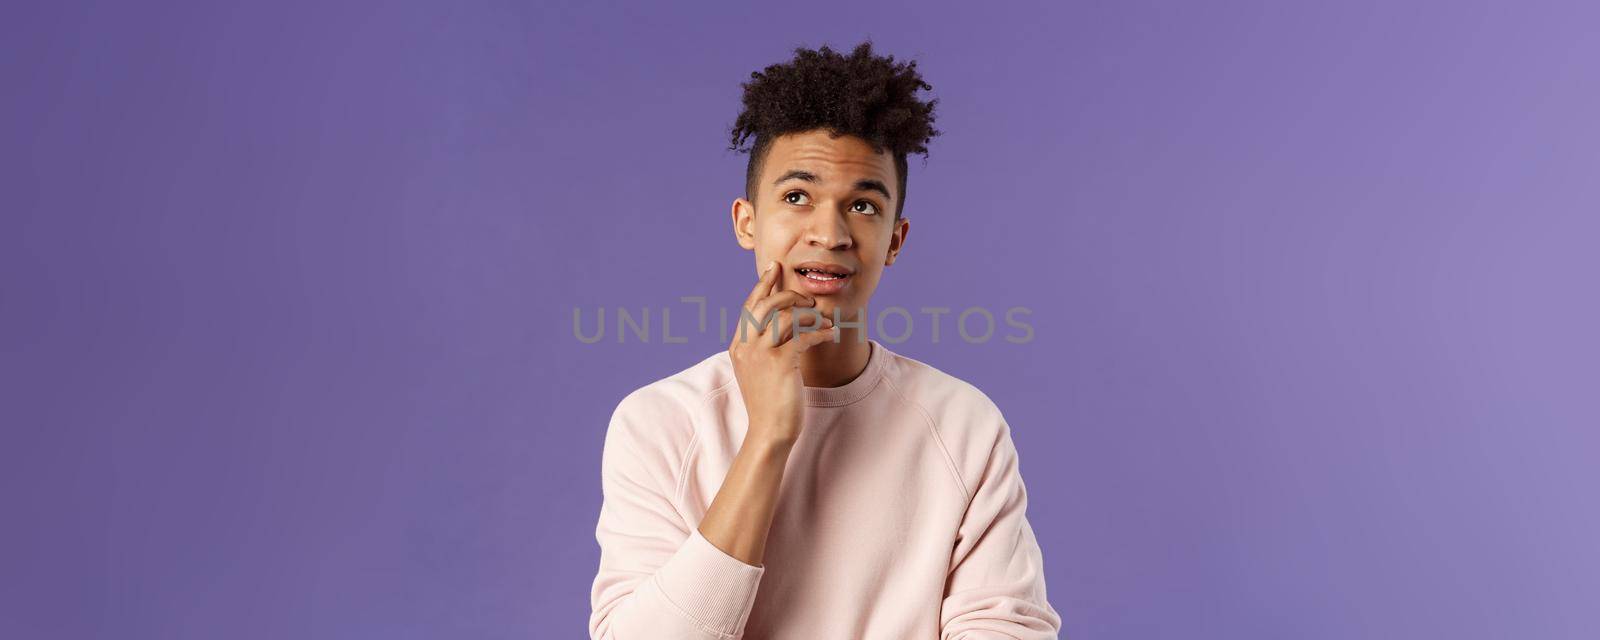 Waist-up portrait of thoughtful unsure young hispanic male student trying solve exercise, looking up thinking, pondering and calculating in mind, standing focused and indecisive purple background.